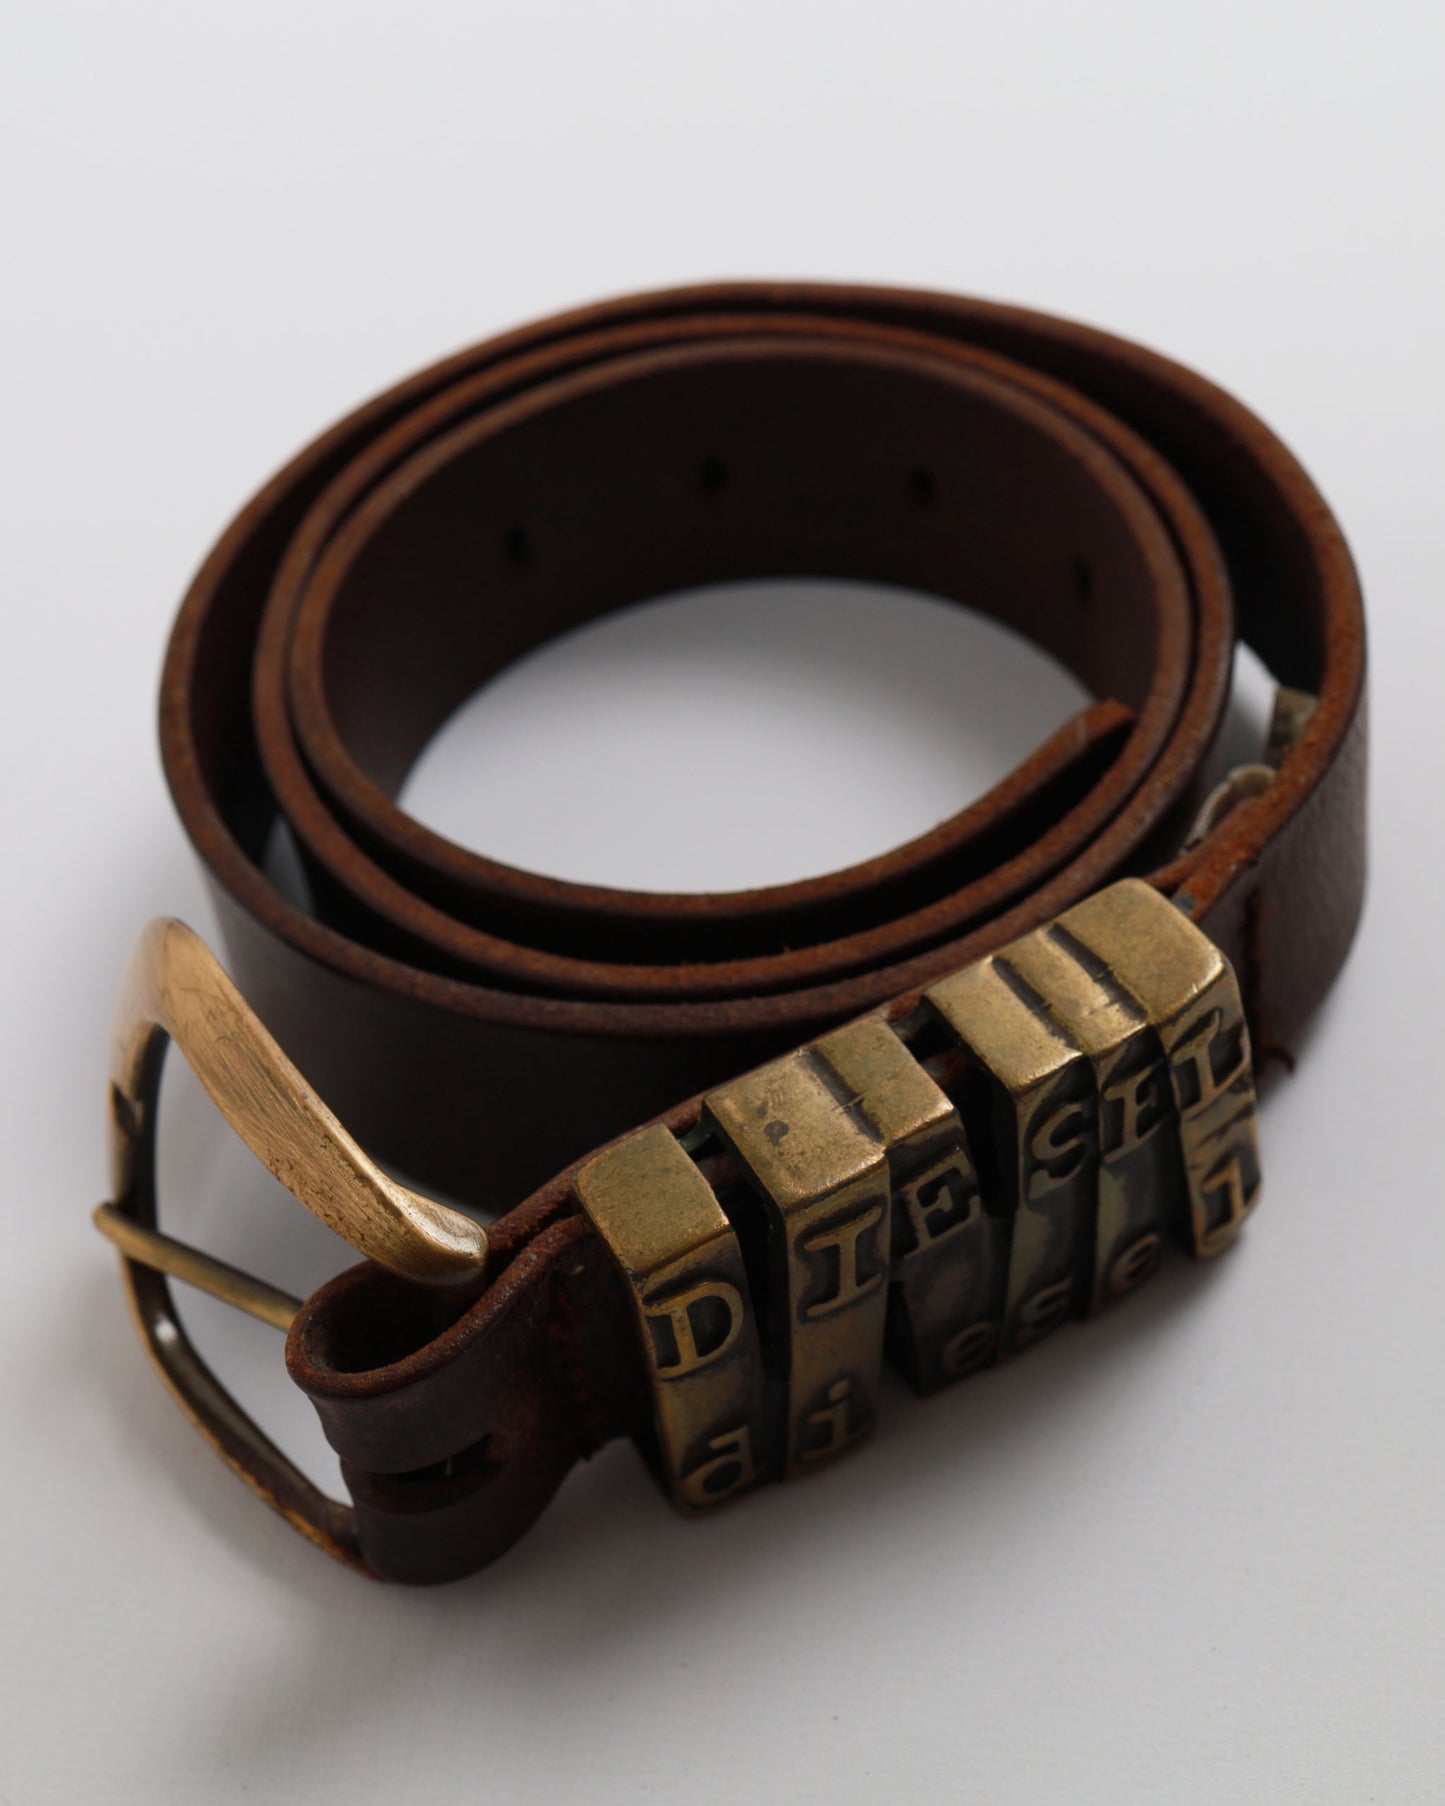 Diesel leather belt with metal buckle and Diesel double logo